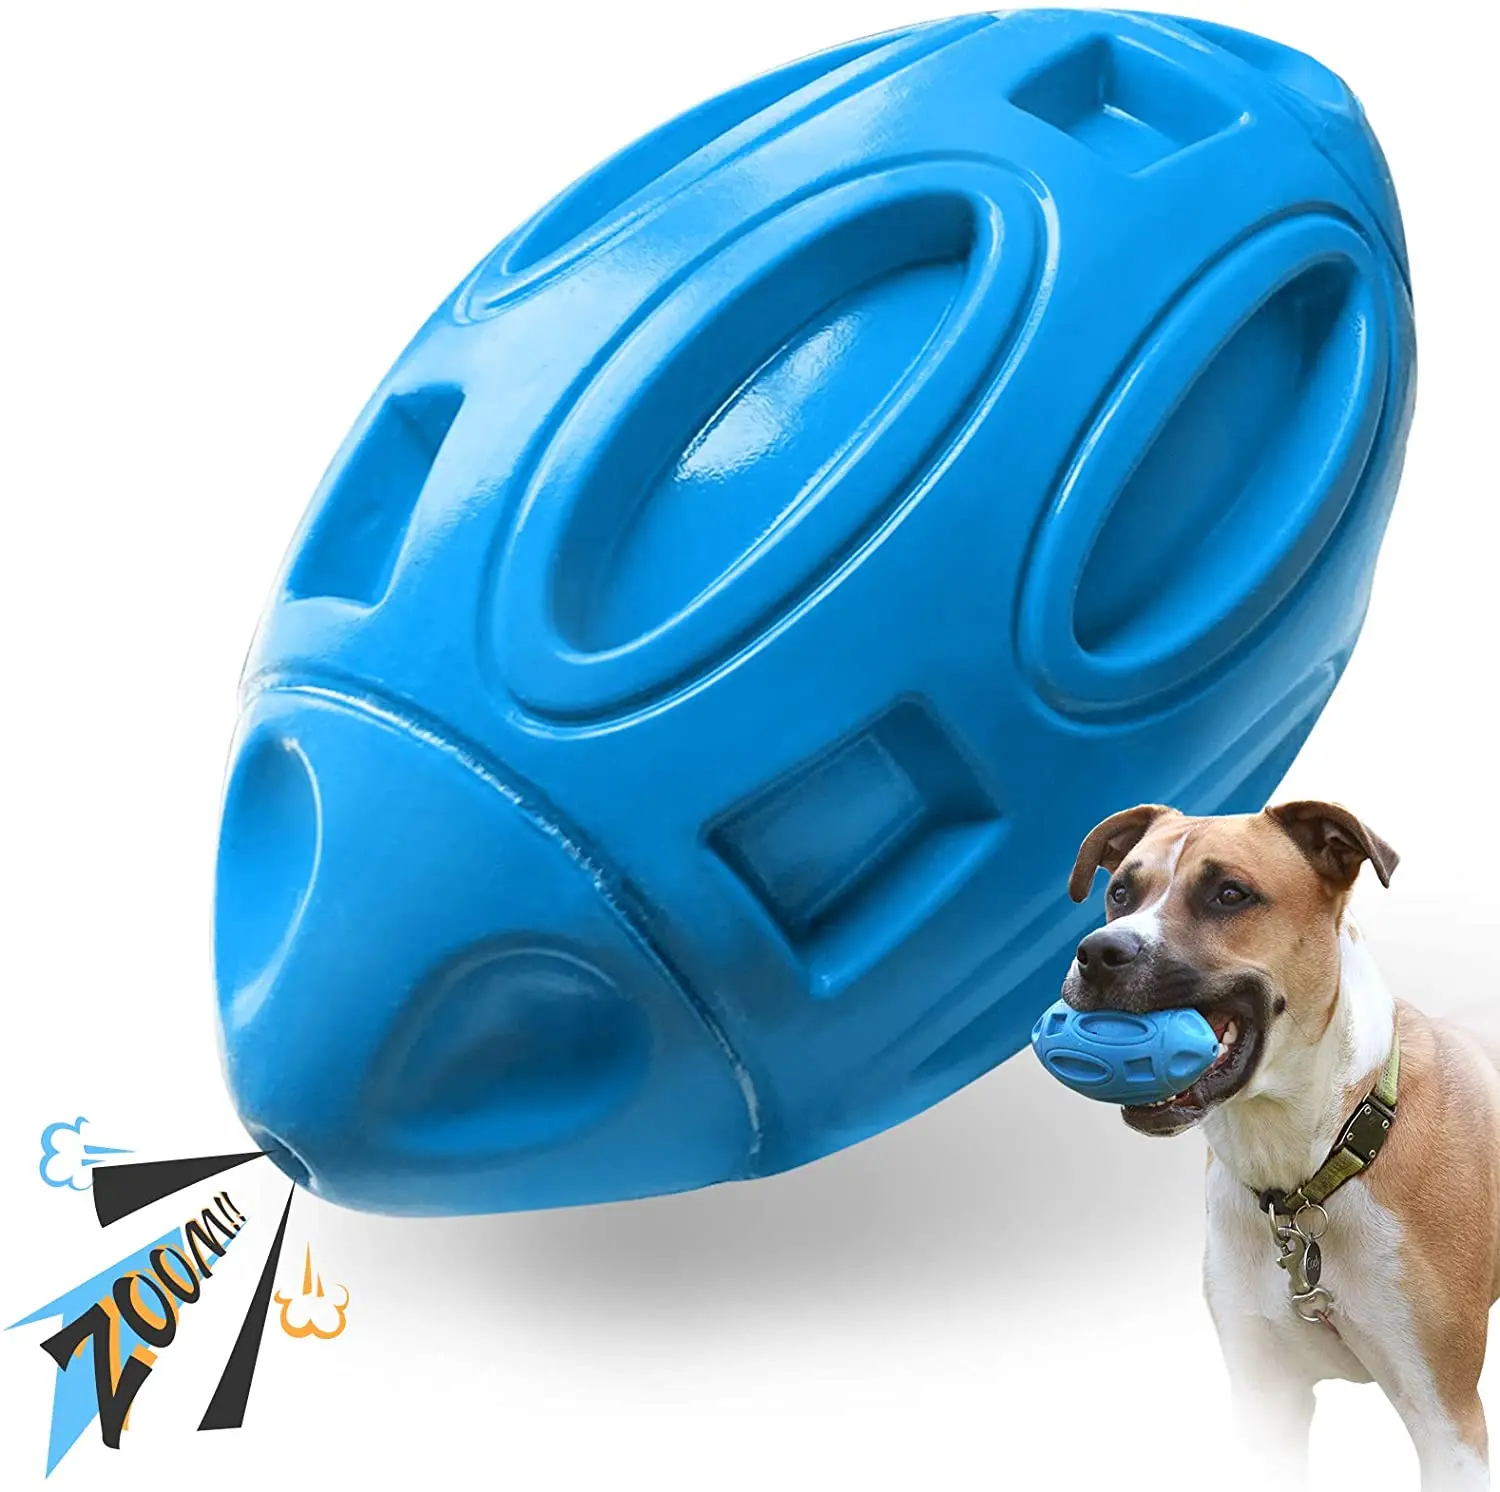 

Squeaky Dog Toys for Aggressive Chewers Rubber Puppy Chew Ball with Squeaker, Almost Indestructible and Durable Pet Toy, Dark blue / orange /green